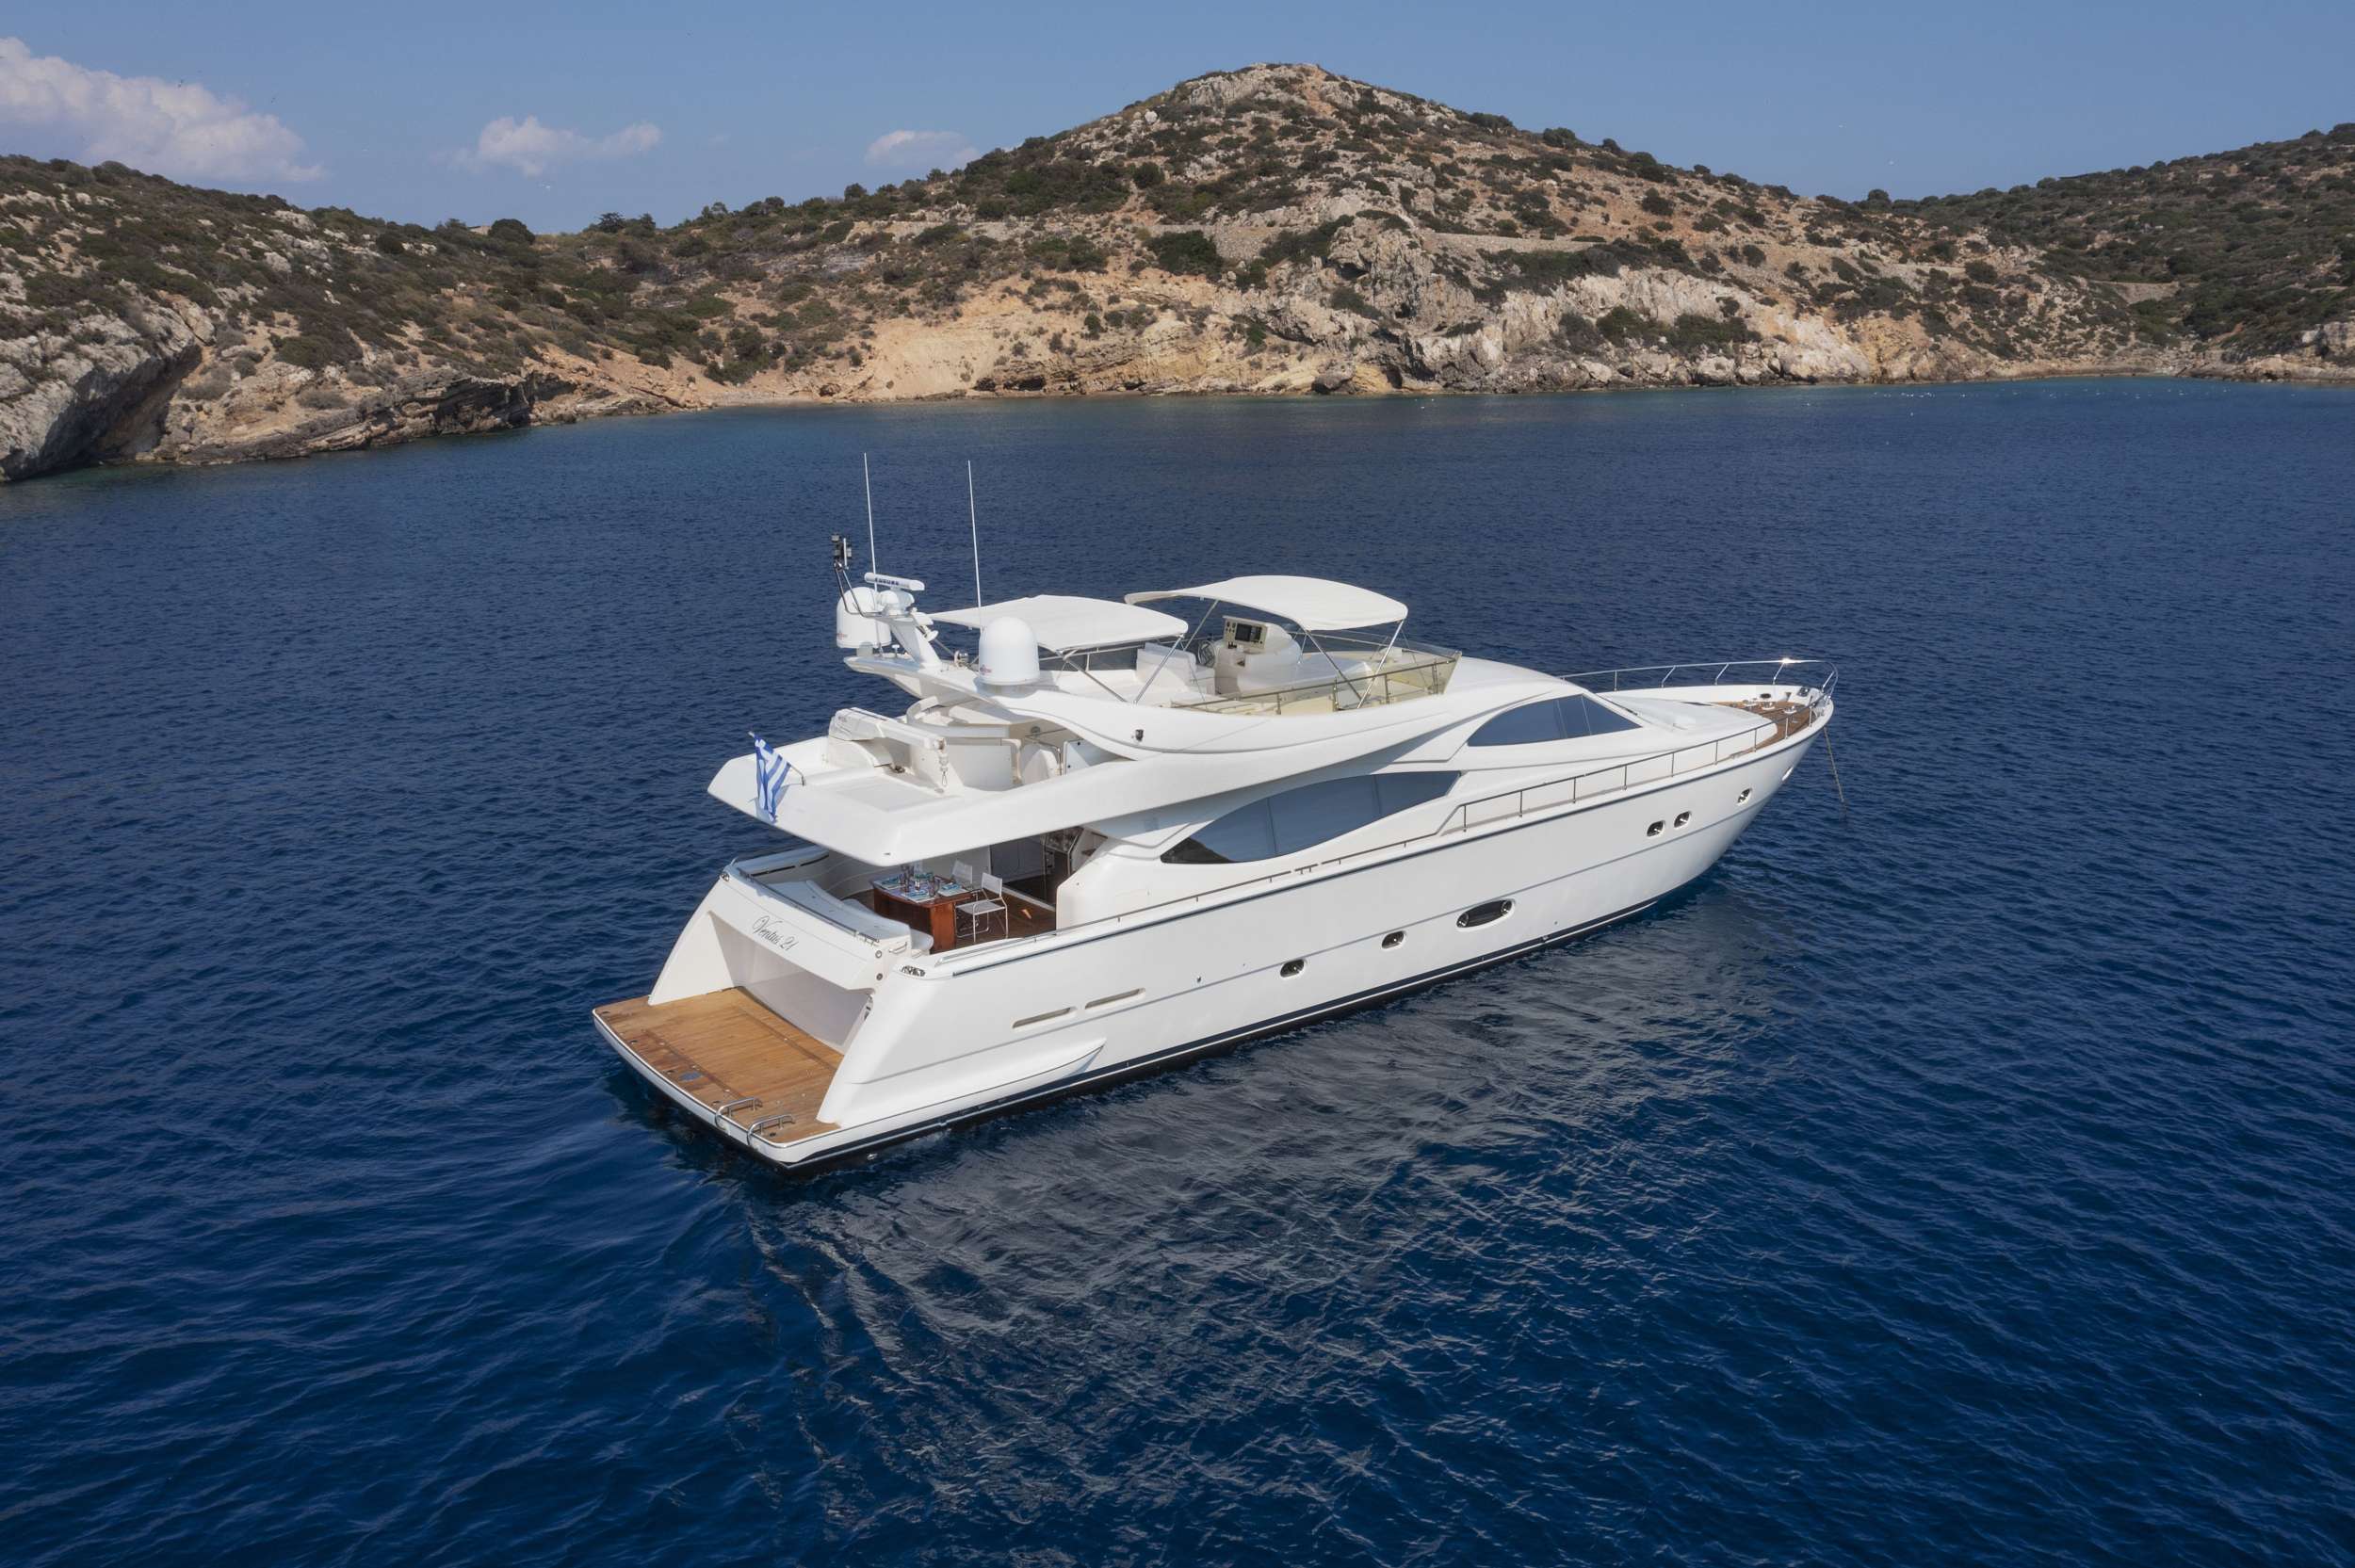 Ventus 21 - Yacht Charter Syros & Boat hire in Greece 1